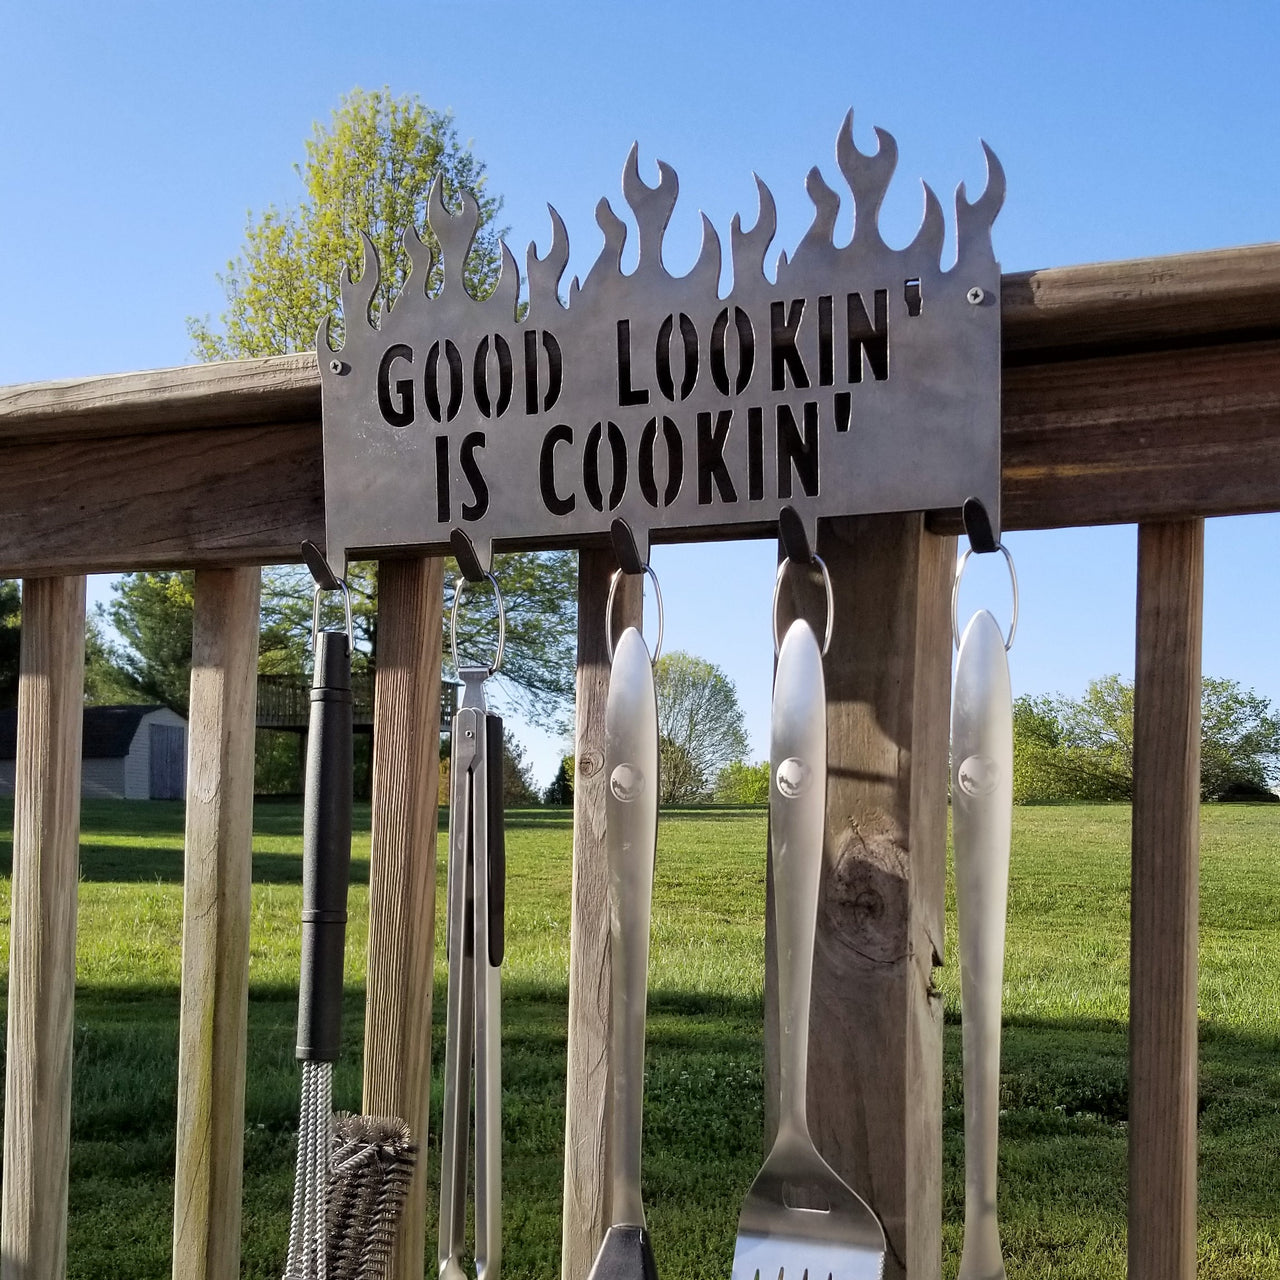 Personalized BBQ Tool Holder For Dad - Metal Grill Sign, Utensil Rack, Caddy, Hooks, Barbecue